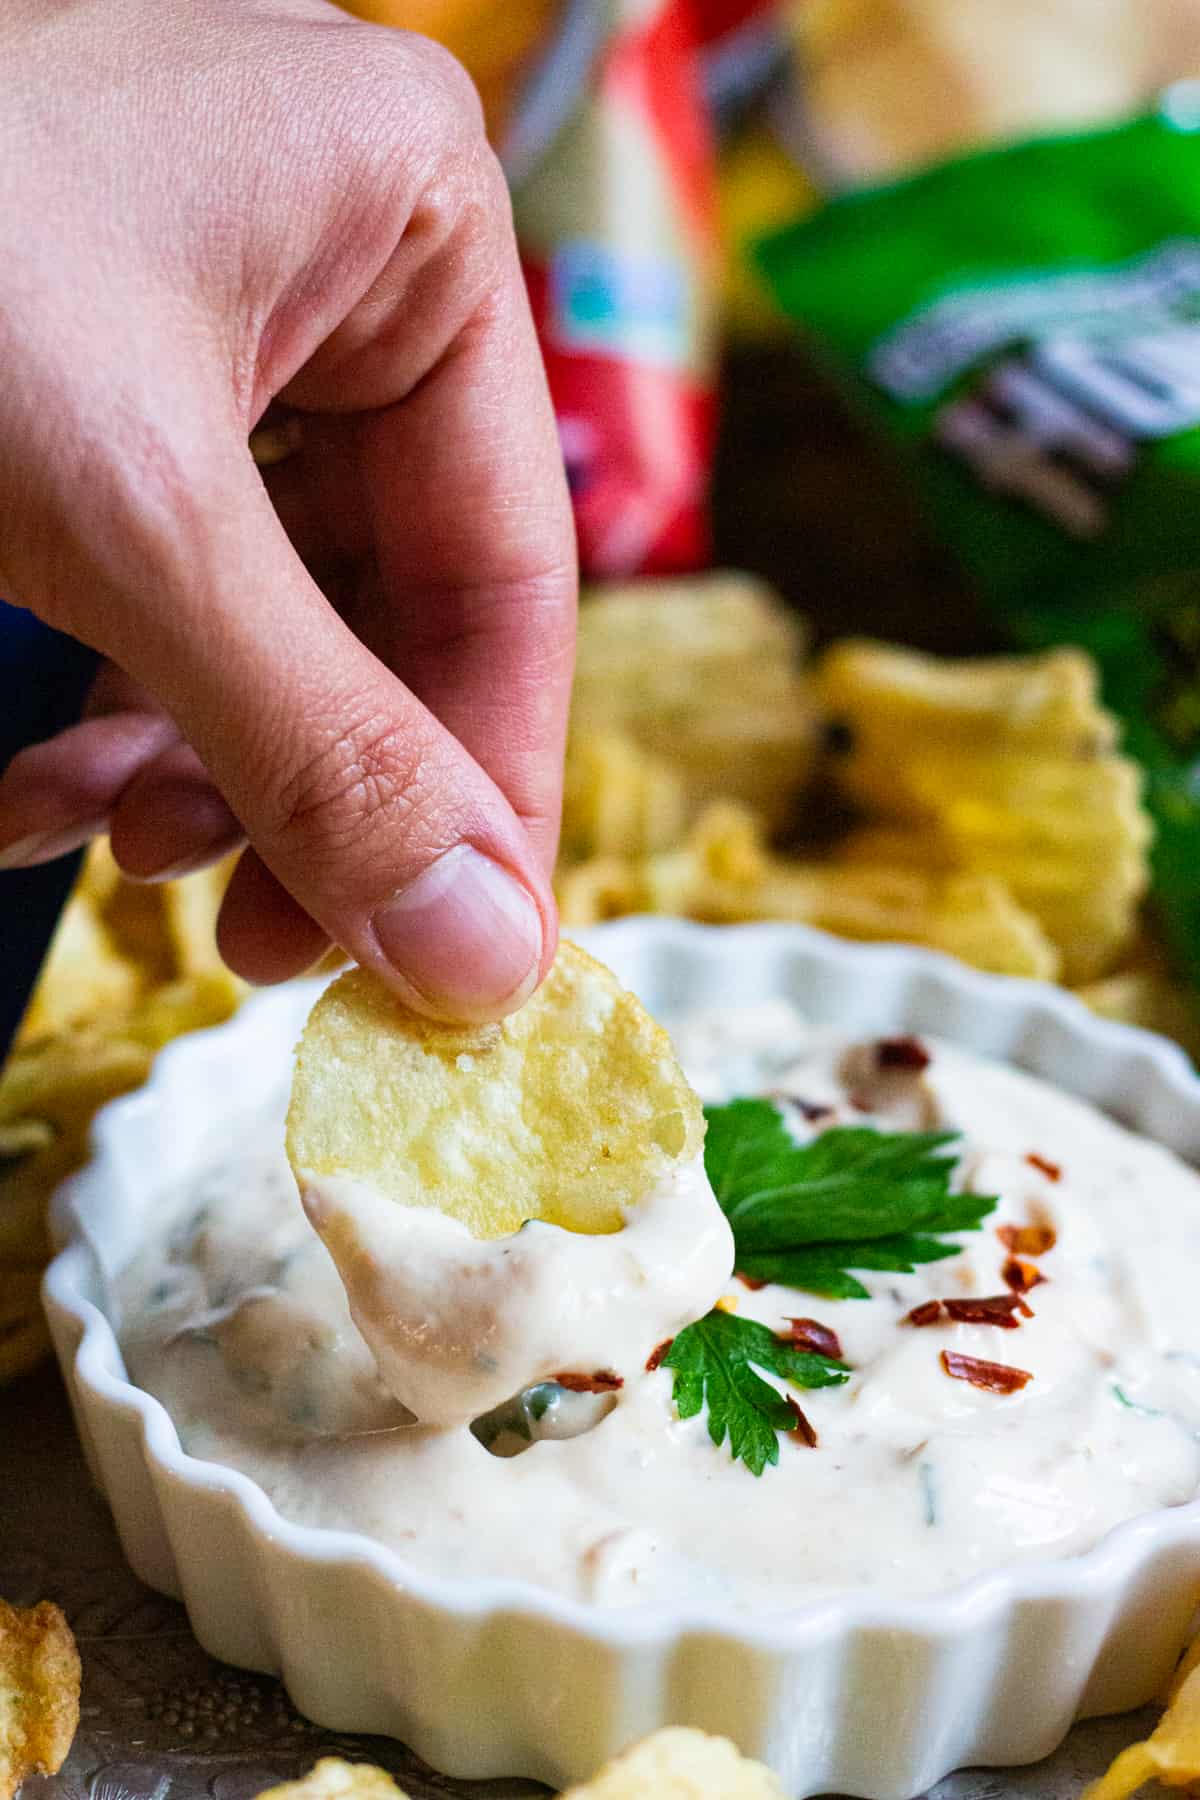 Have fun at your parties with this Roasted Garlic Dip served with delicious chips! Everyone loves a creamy, garlicky dip with herbs and spices!
